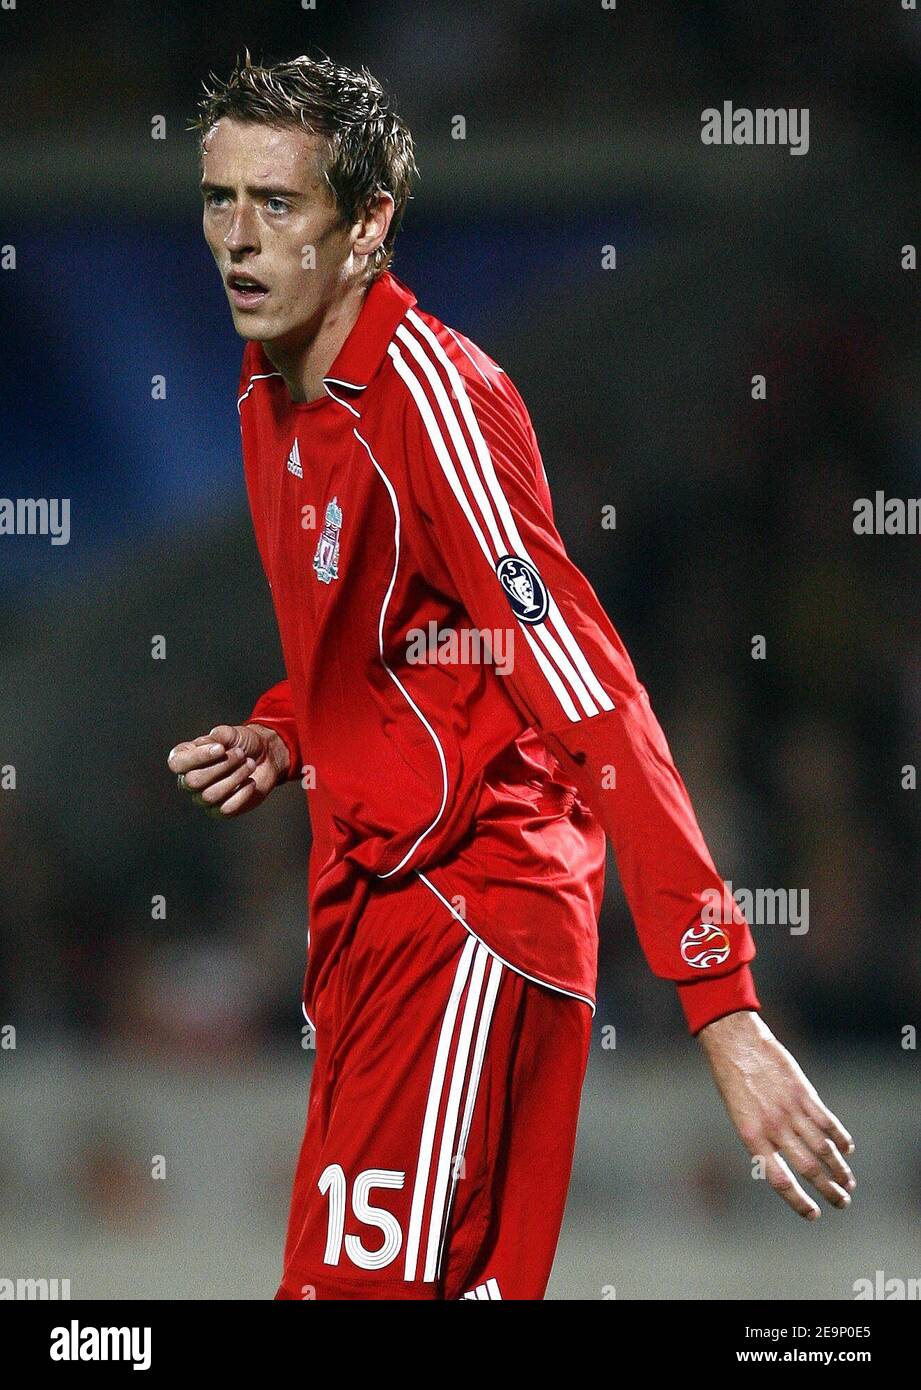 Liverpool's Peter Crouch during the UEFA Champions League, Group C,  Girondins de Bordeaux vs Liverpool FC at the Stade Chaban-Delmas in  Bordeaux, France on October 18, 2006. Liverpool won 1-0. Photo by